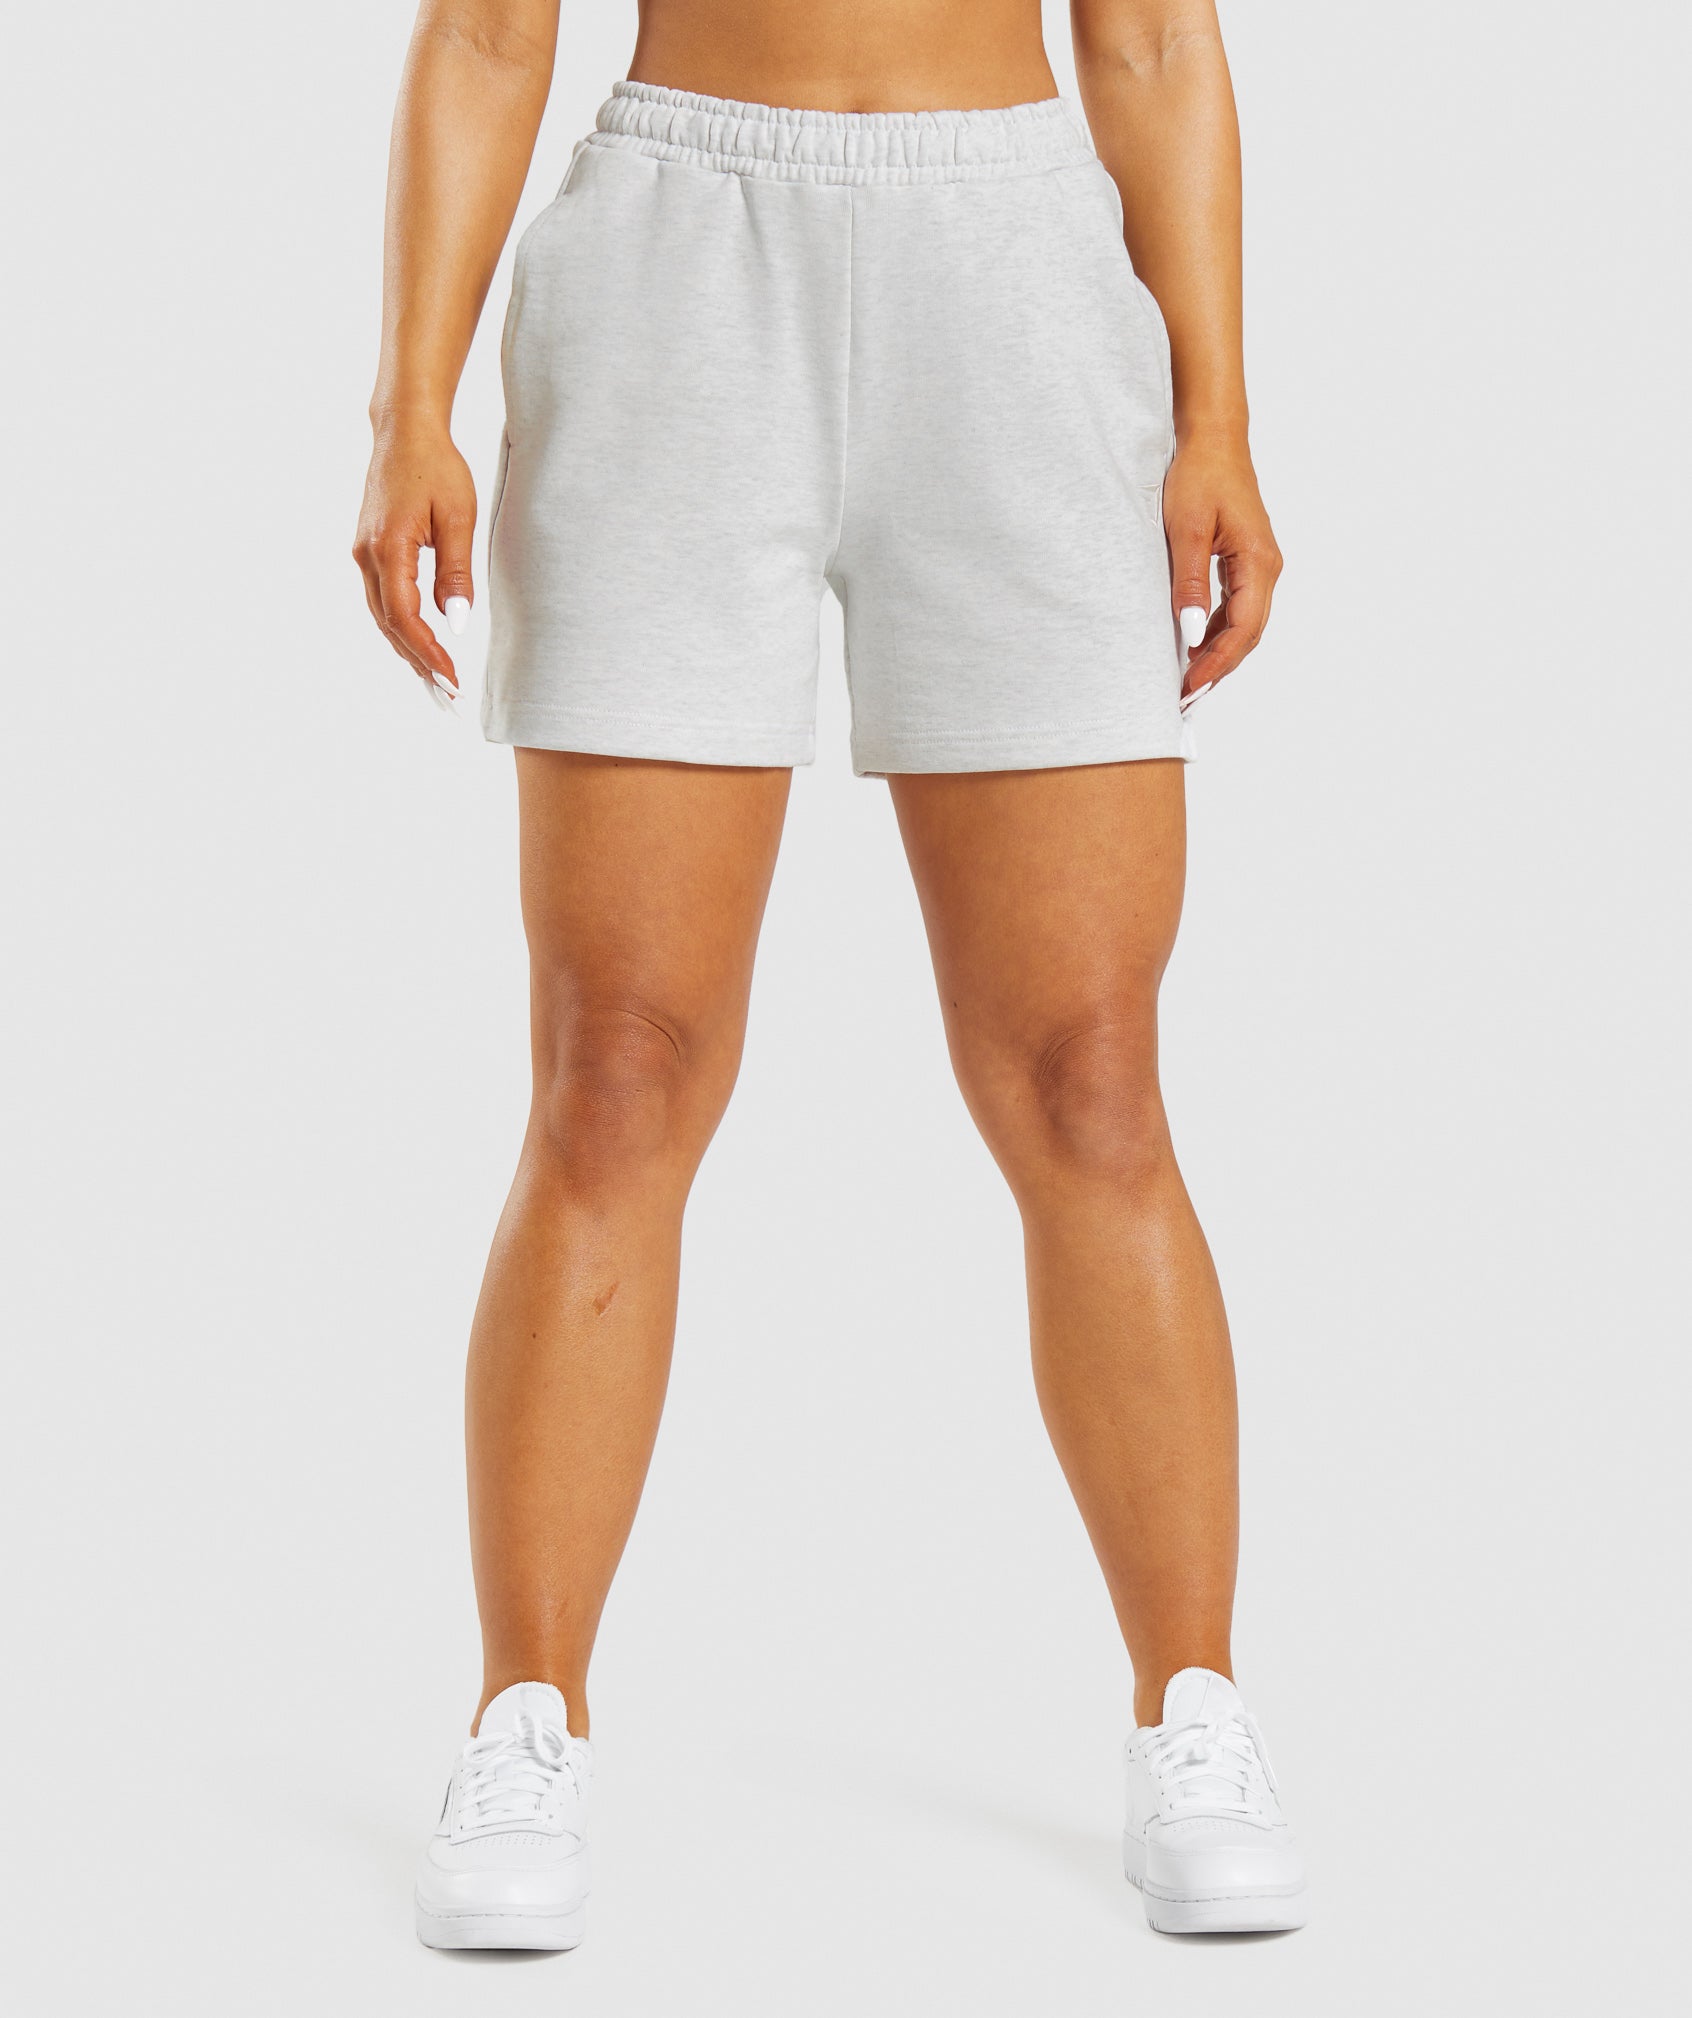 Rest Day Sweats Shorts in Cloud Marl